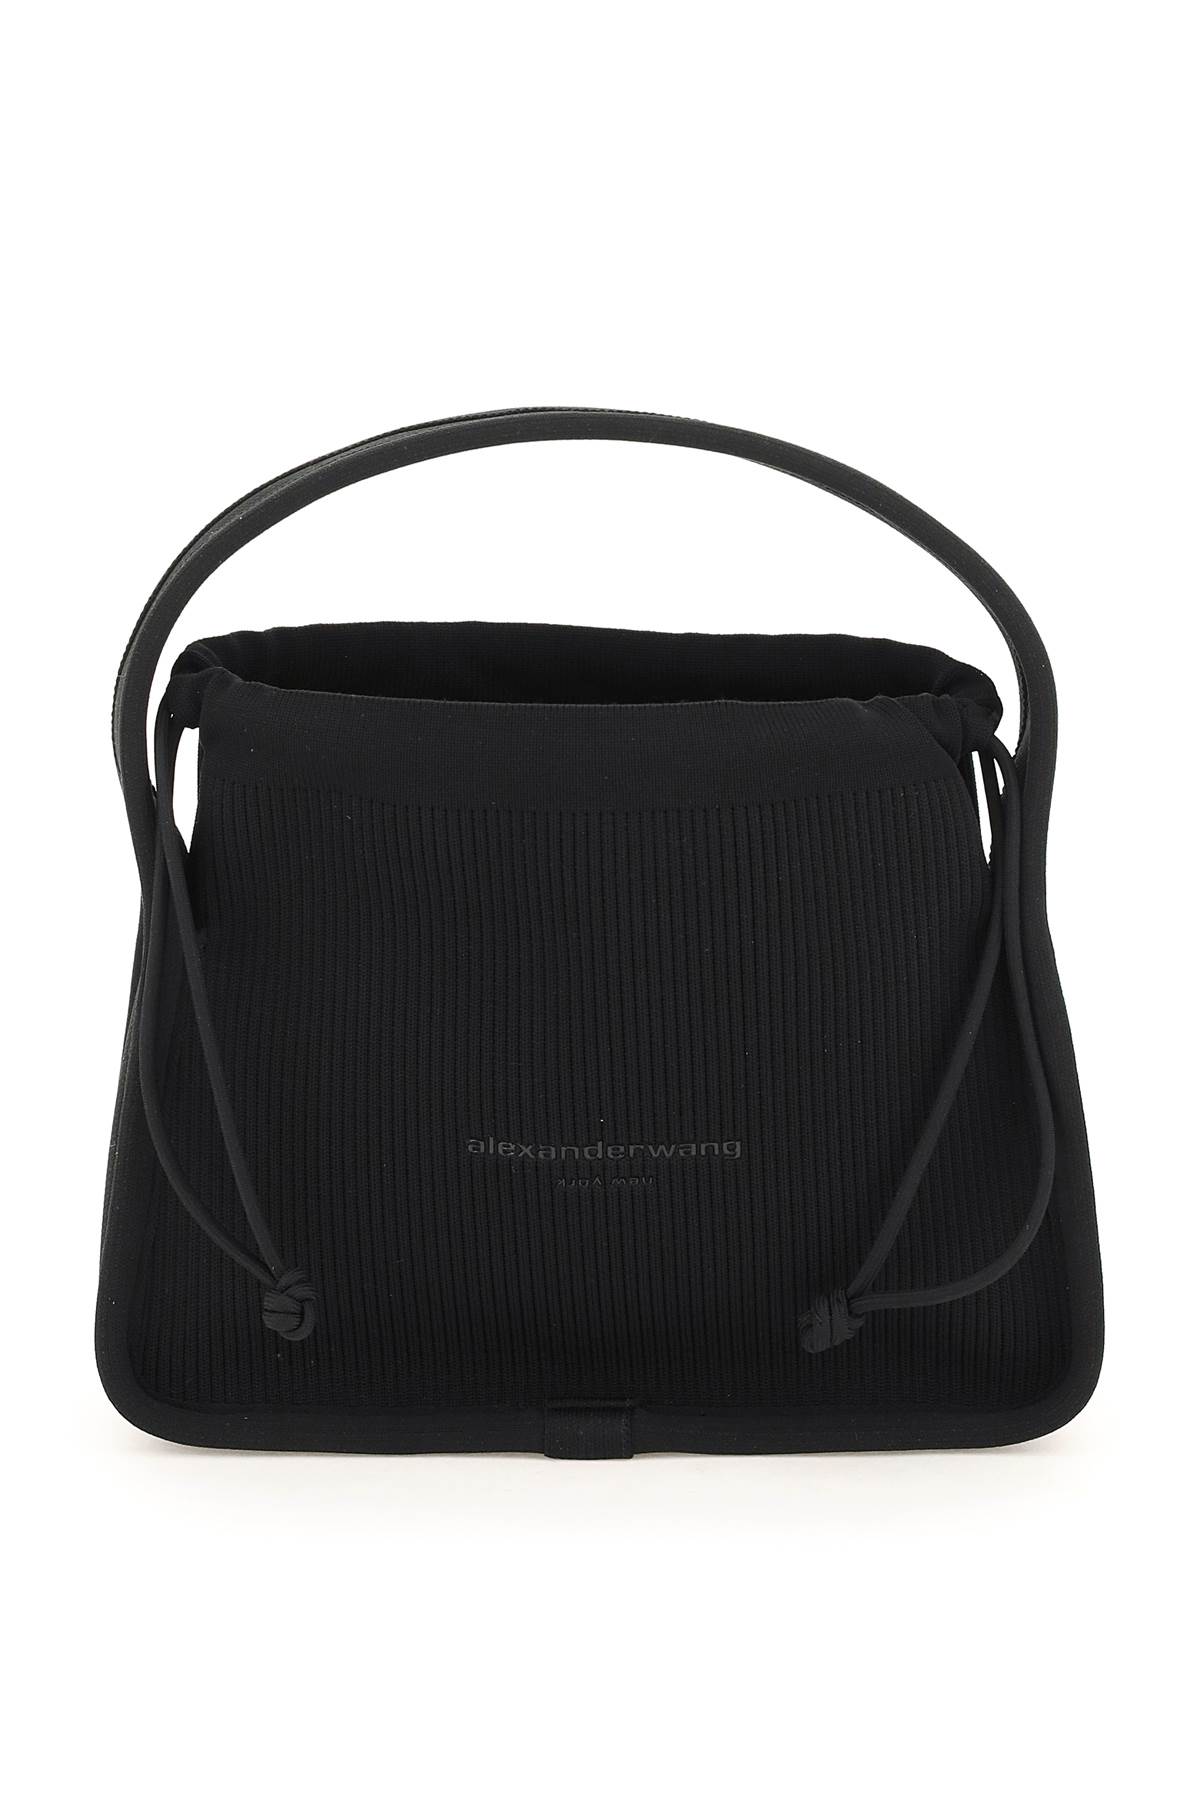 Ryan Hand Bag In Black Leather